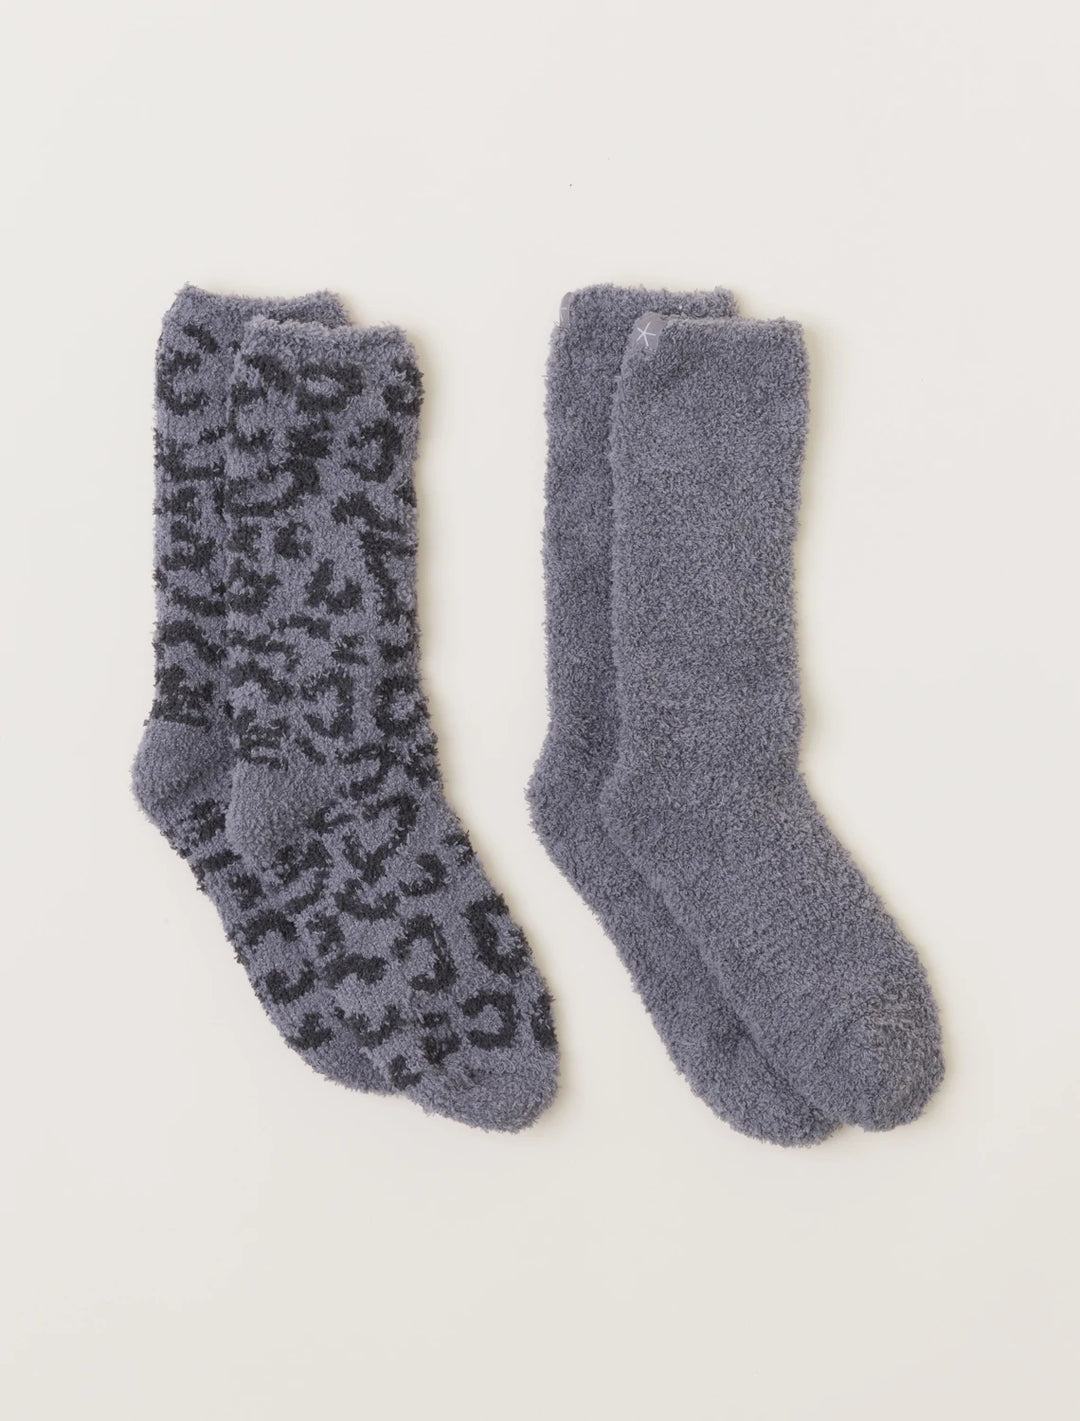 Barefoot Dreams - CozyChic Women's Barefoot in the Wild 2 Pair Socks Set in Graphite Carbon Multi